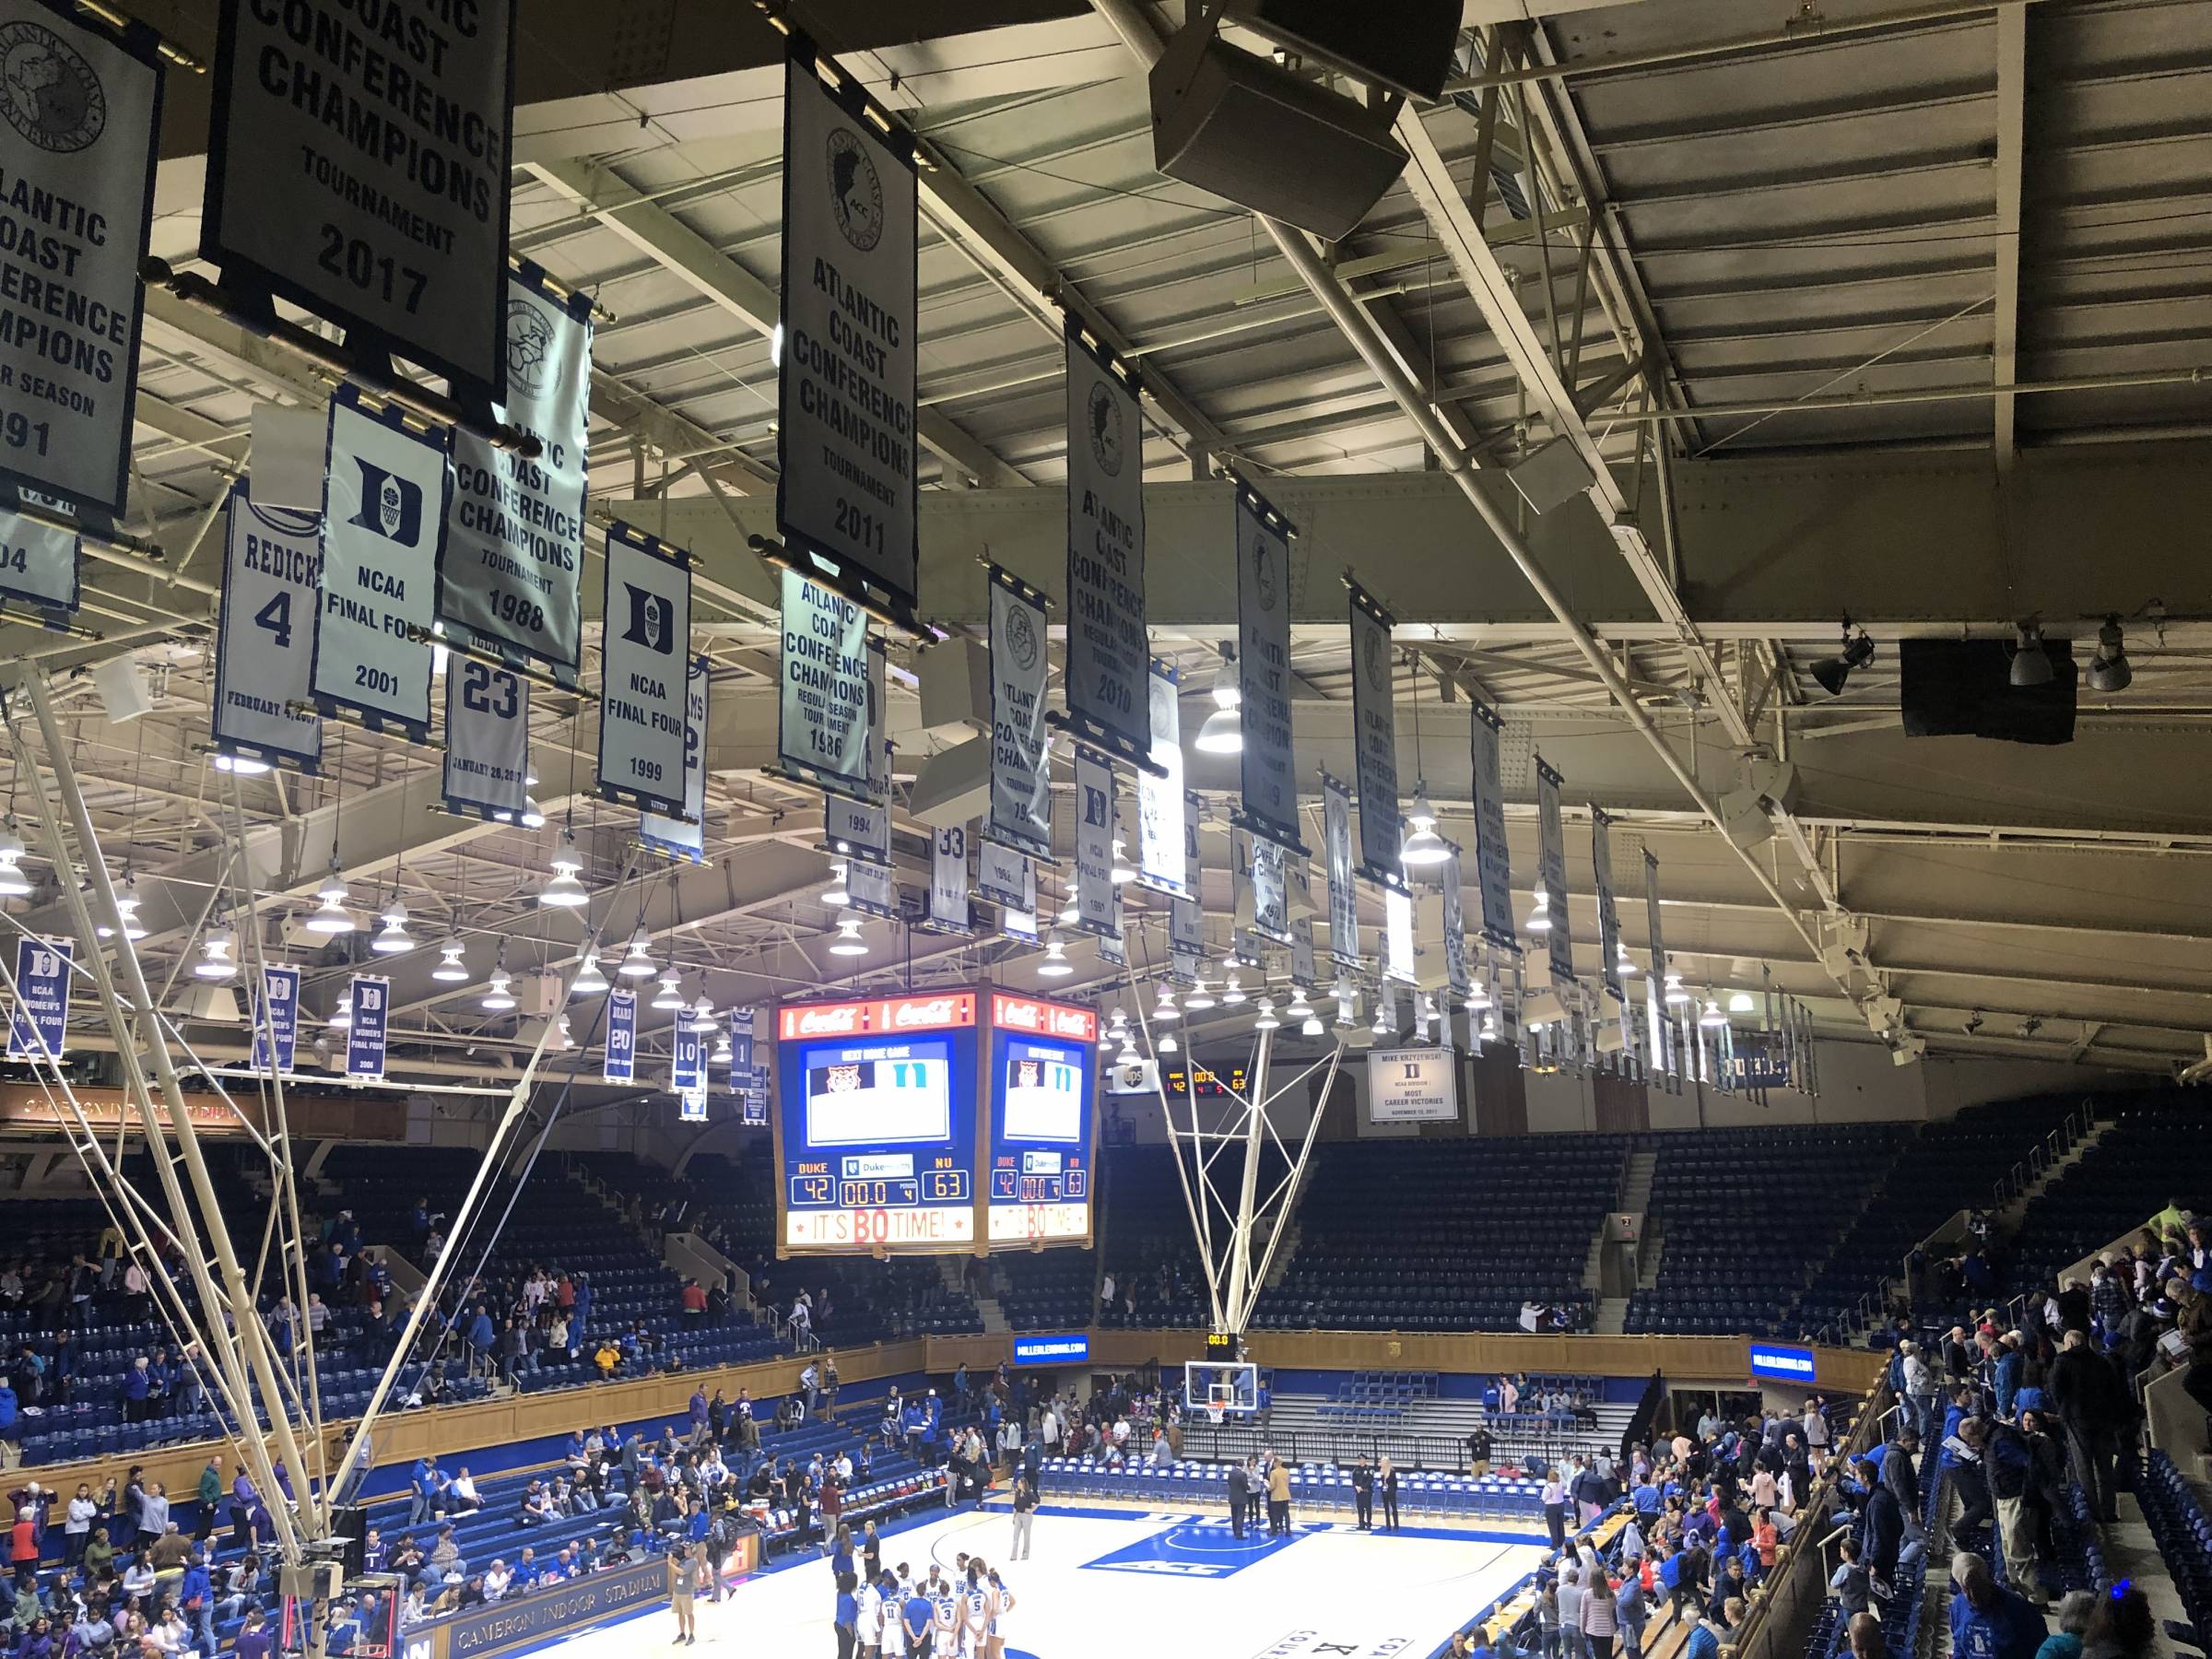 Cameron Indoor Stadium Seating Chart General Admission | Cabinets Matttroy